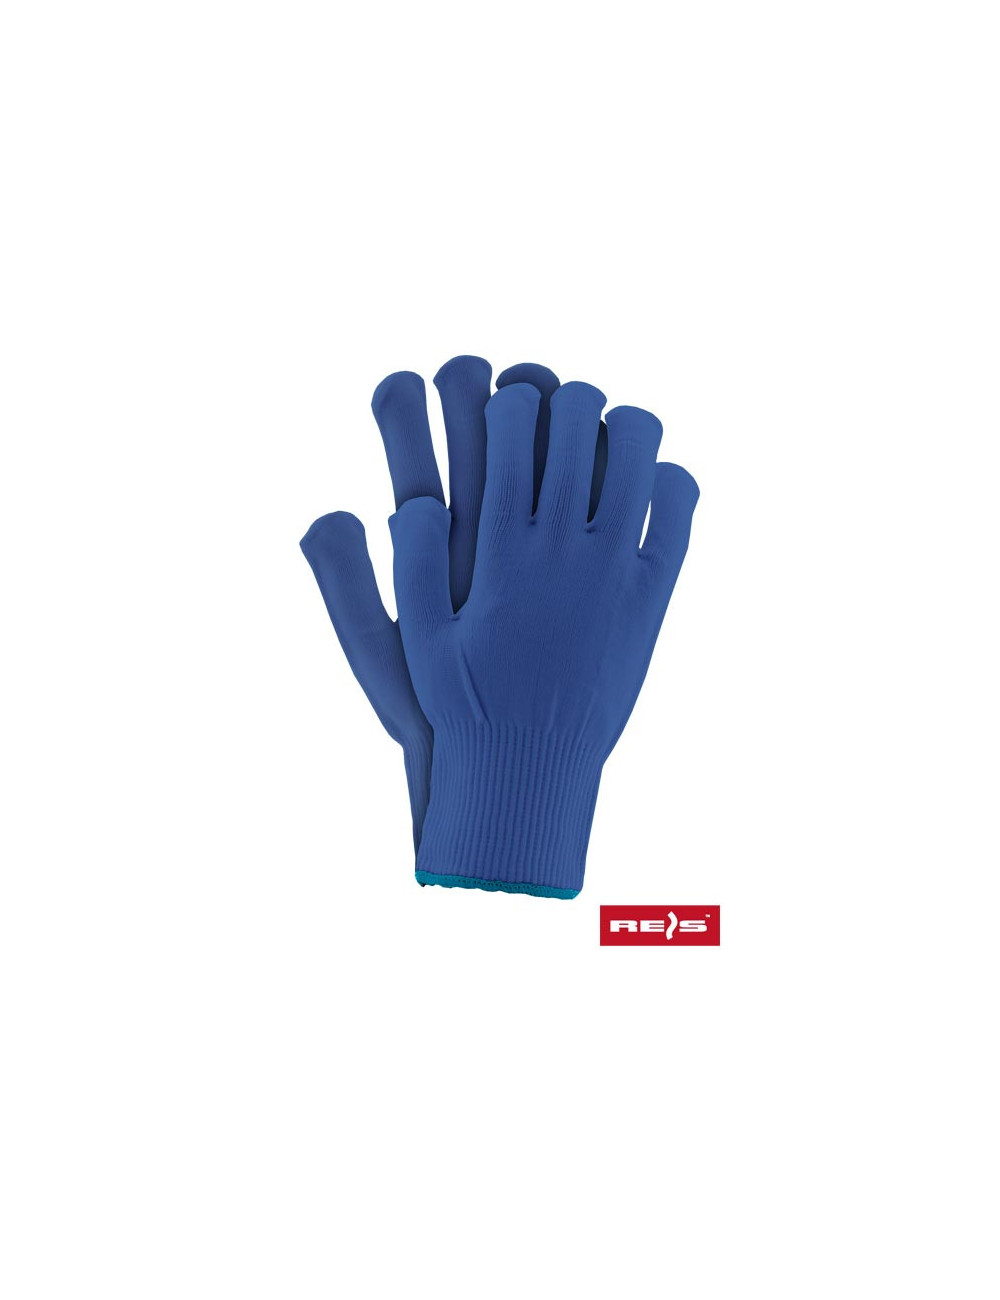 Protective gloves rpoly n blue Reis